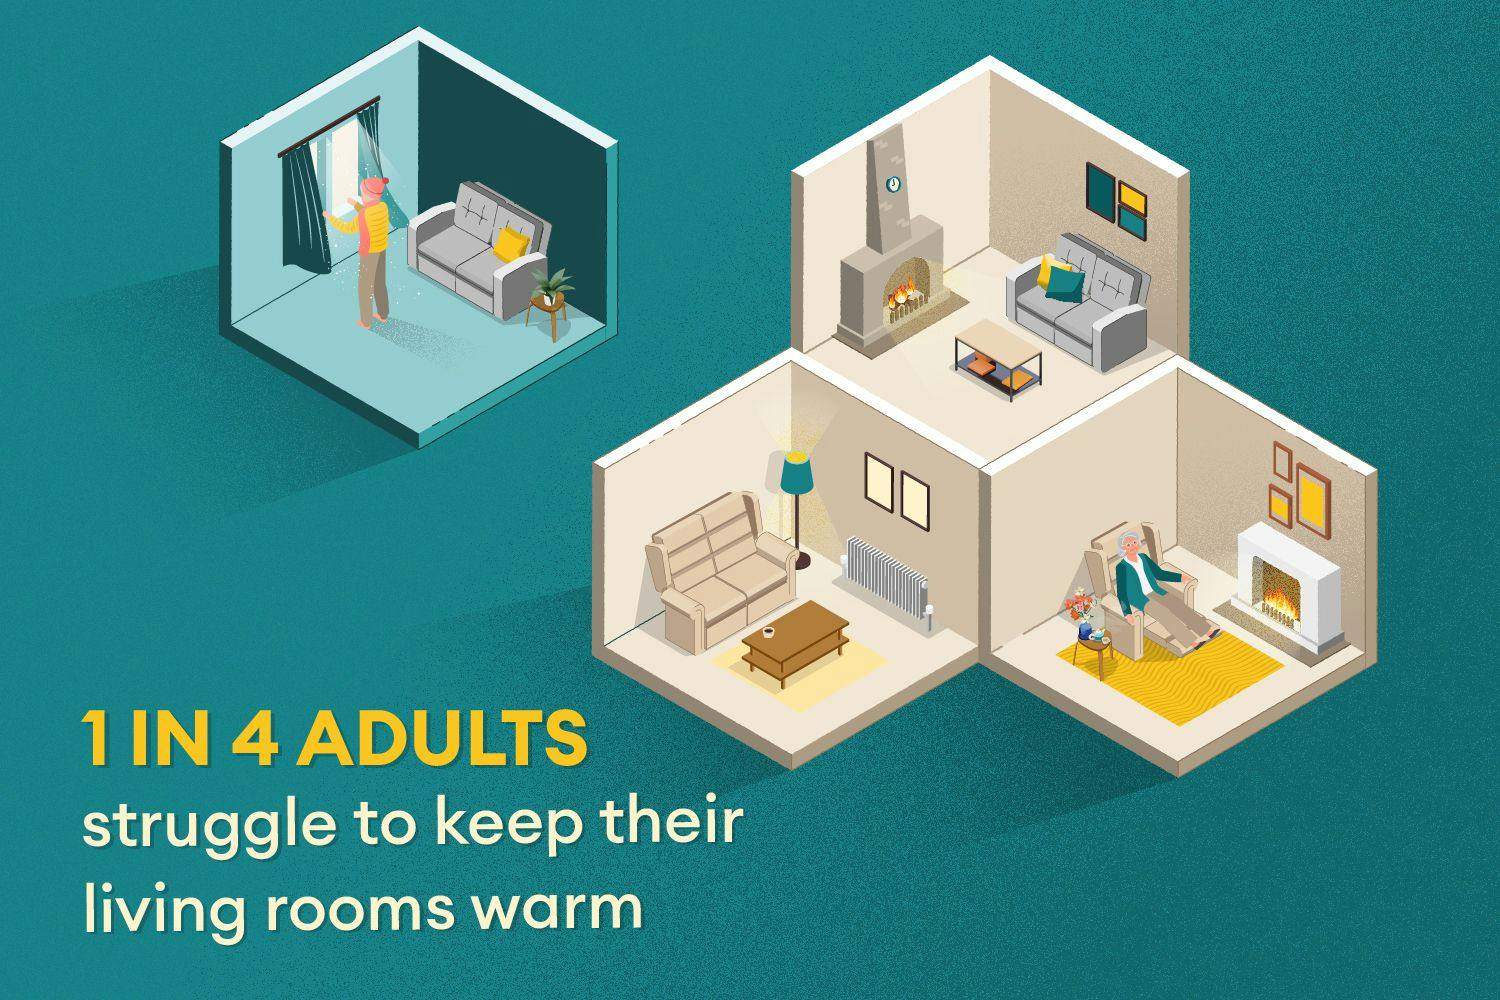 Text: '1 in 4 adults struggle to keep their living rooms warm'